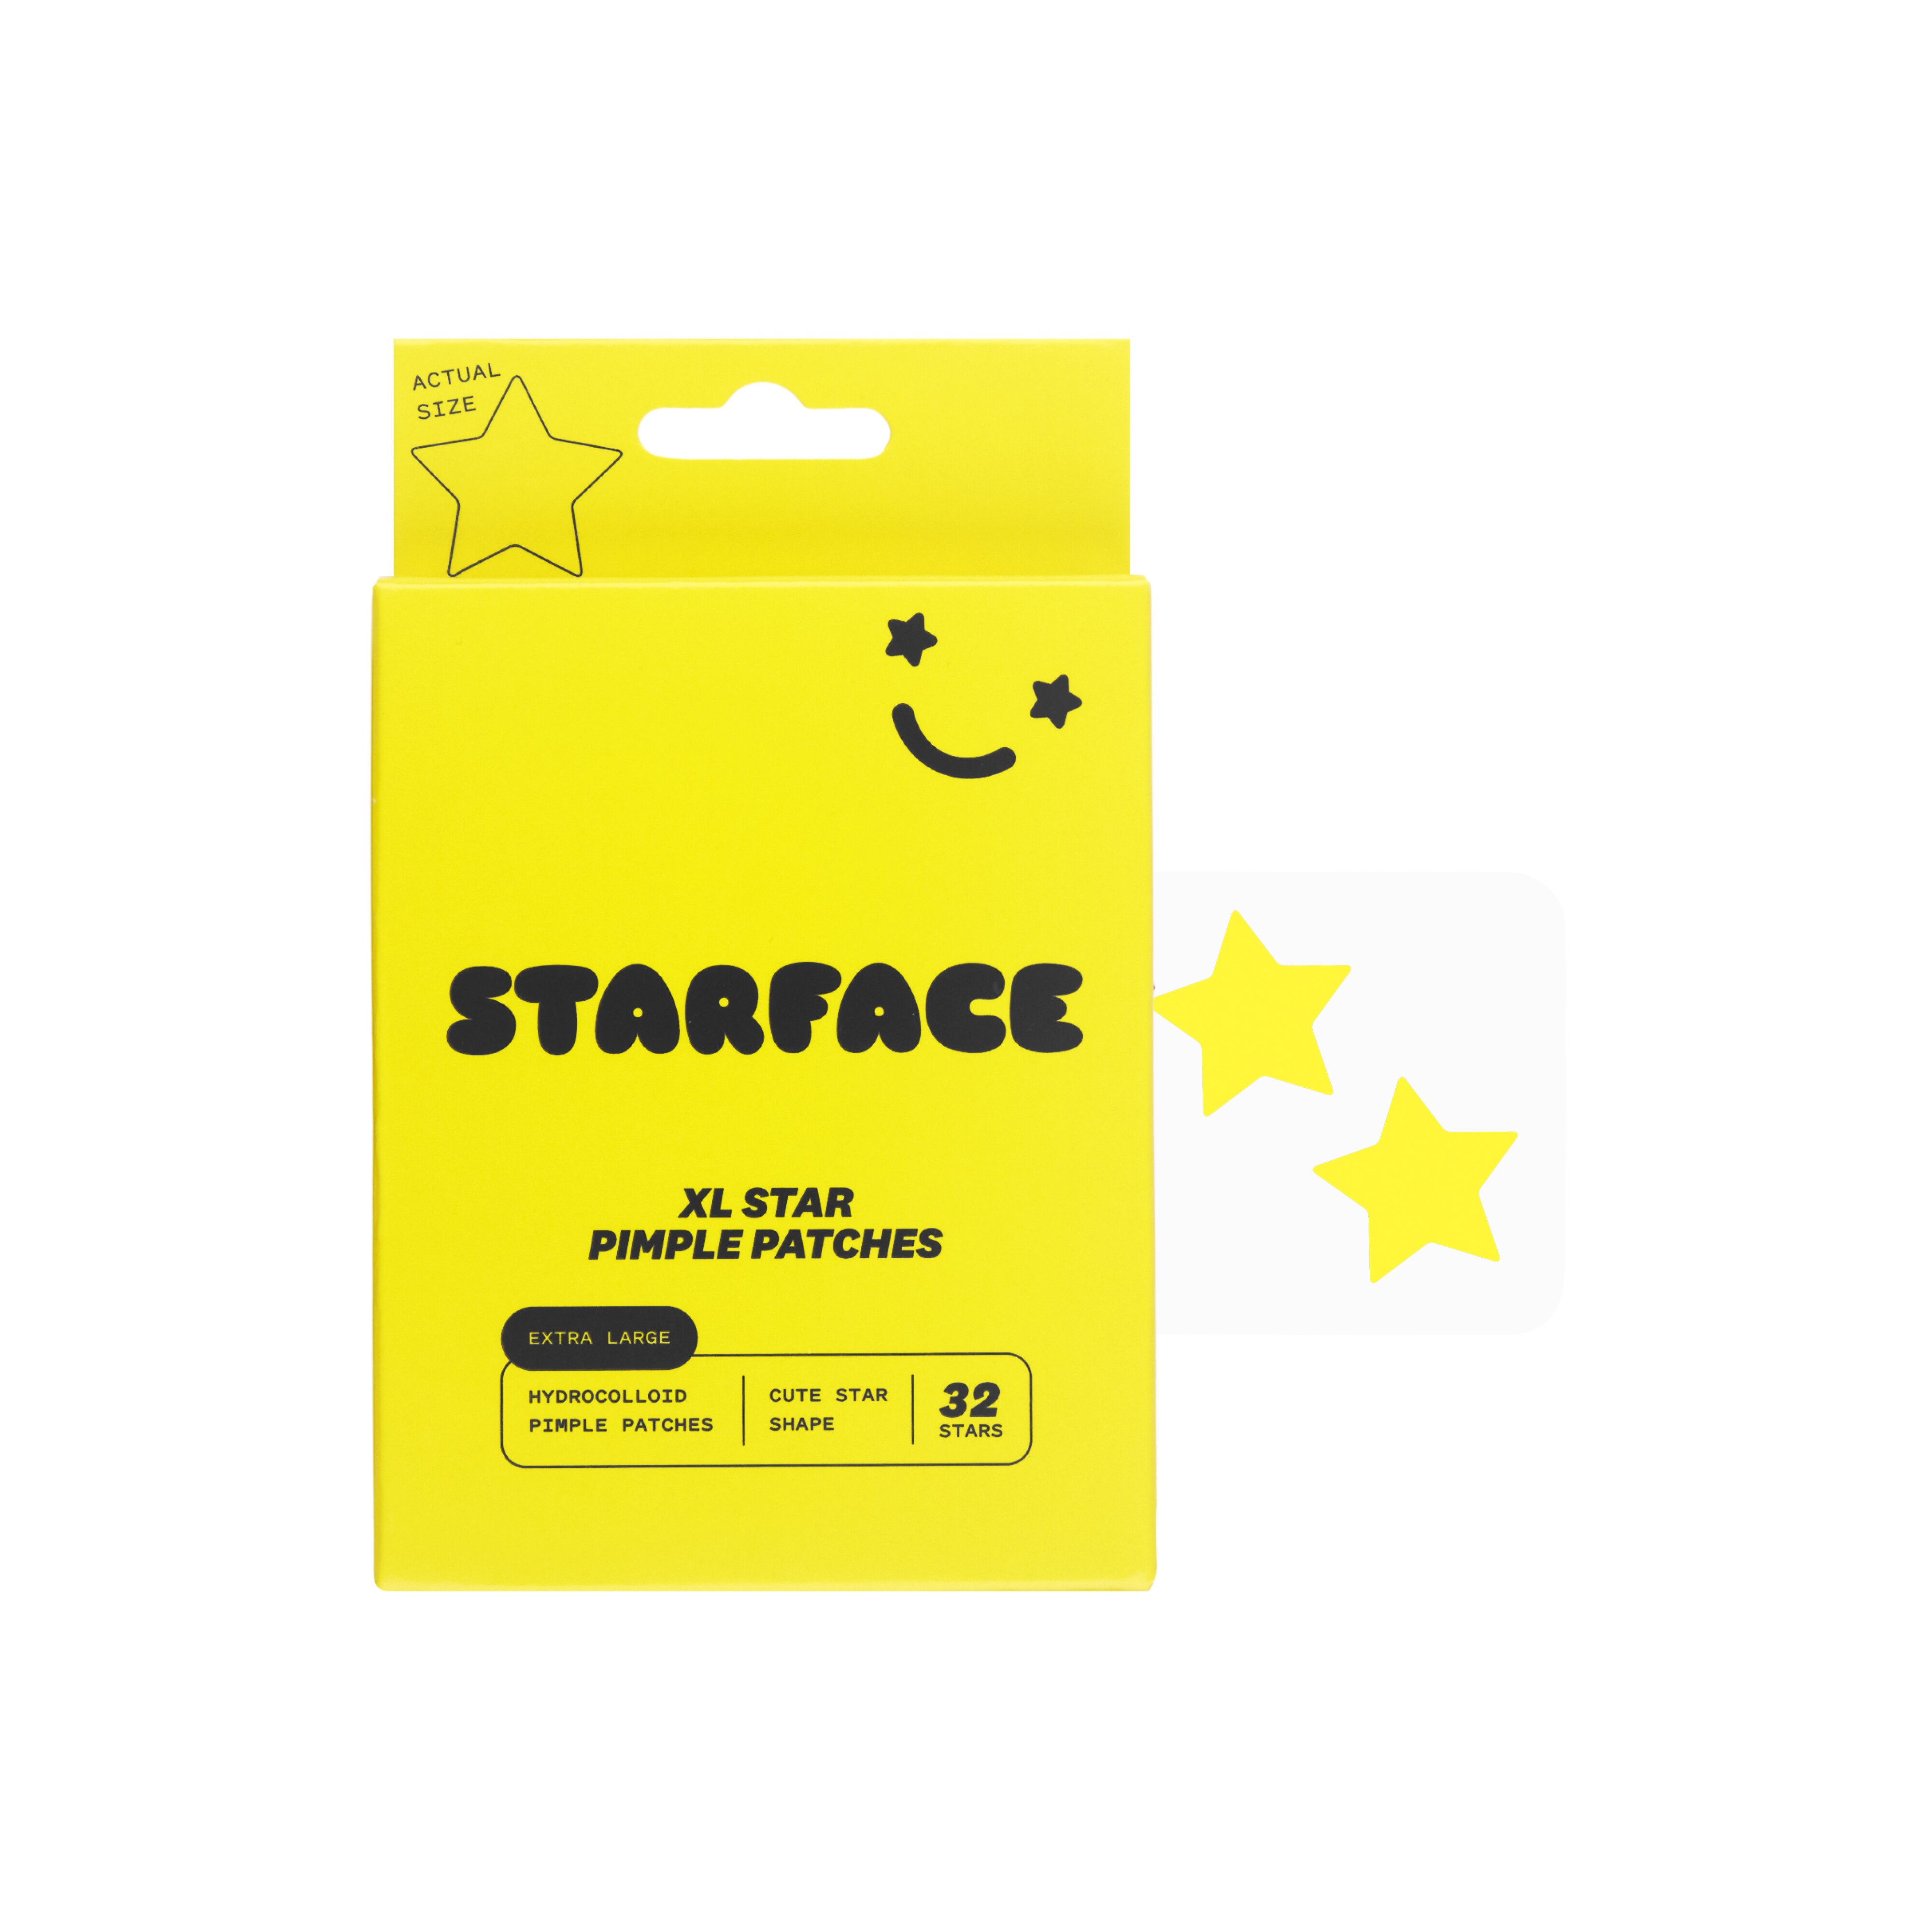 Celebrities love Starface pimple patches